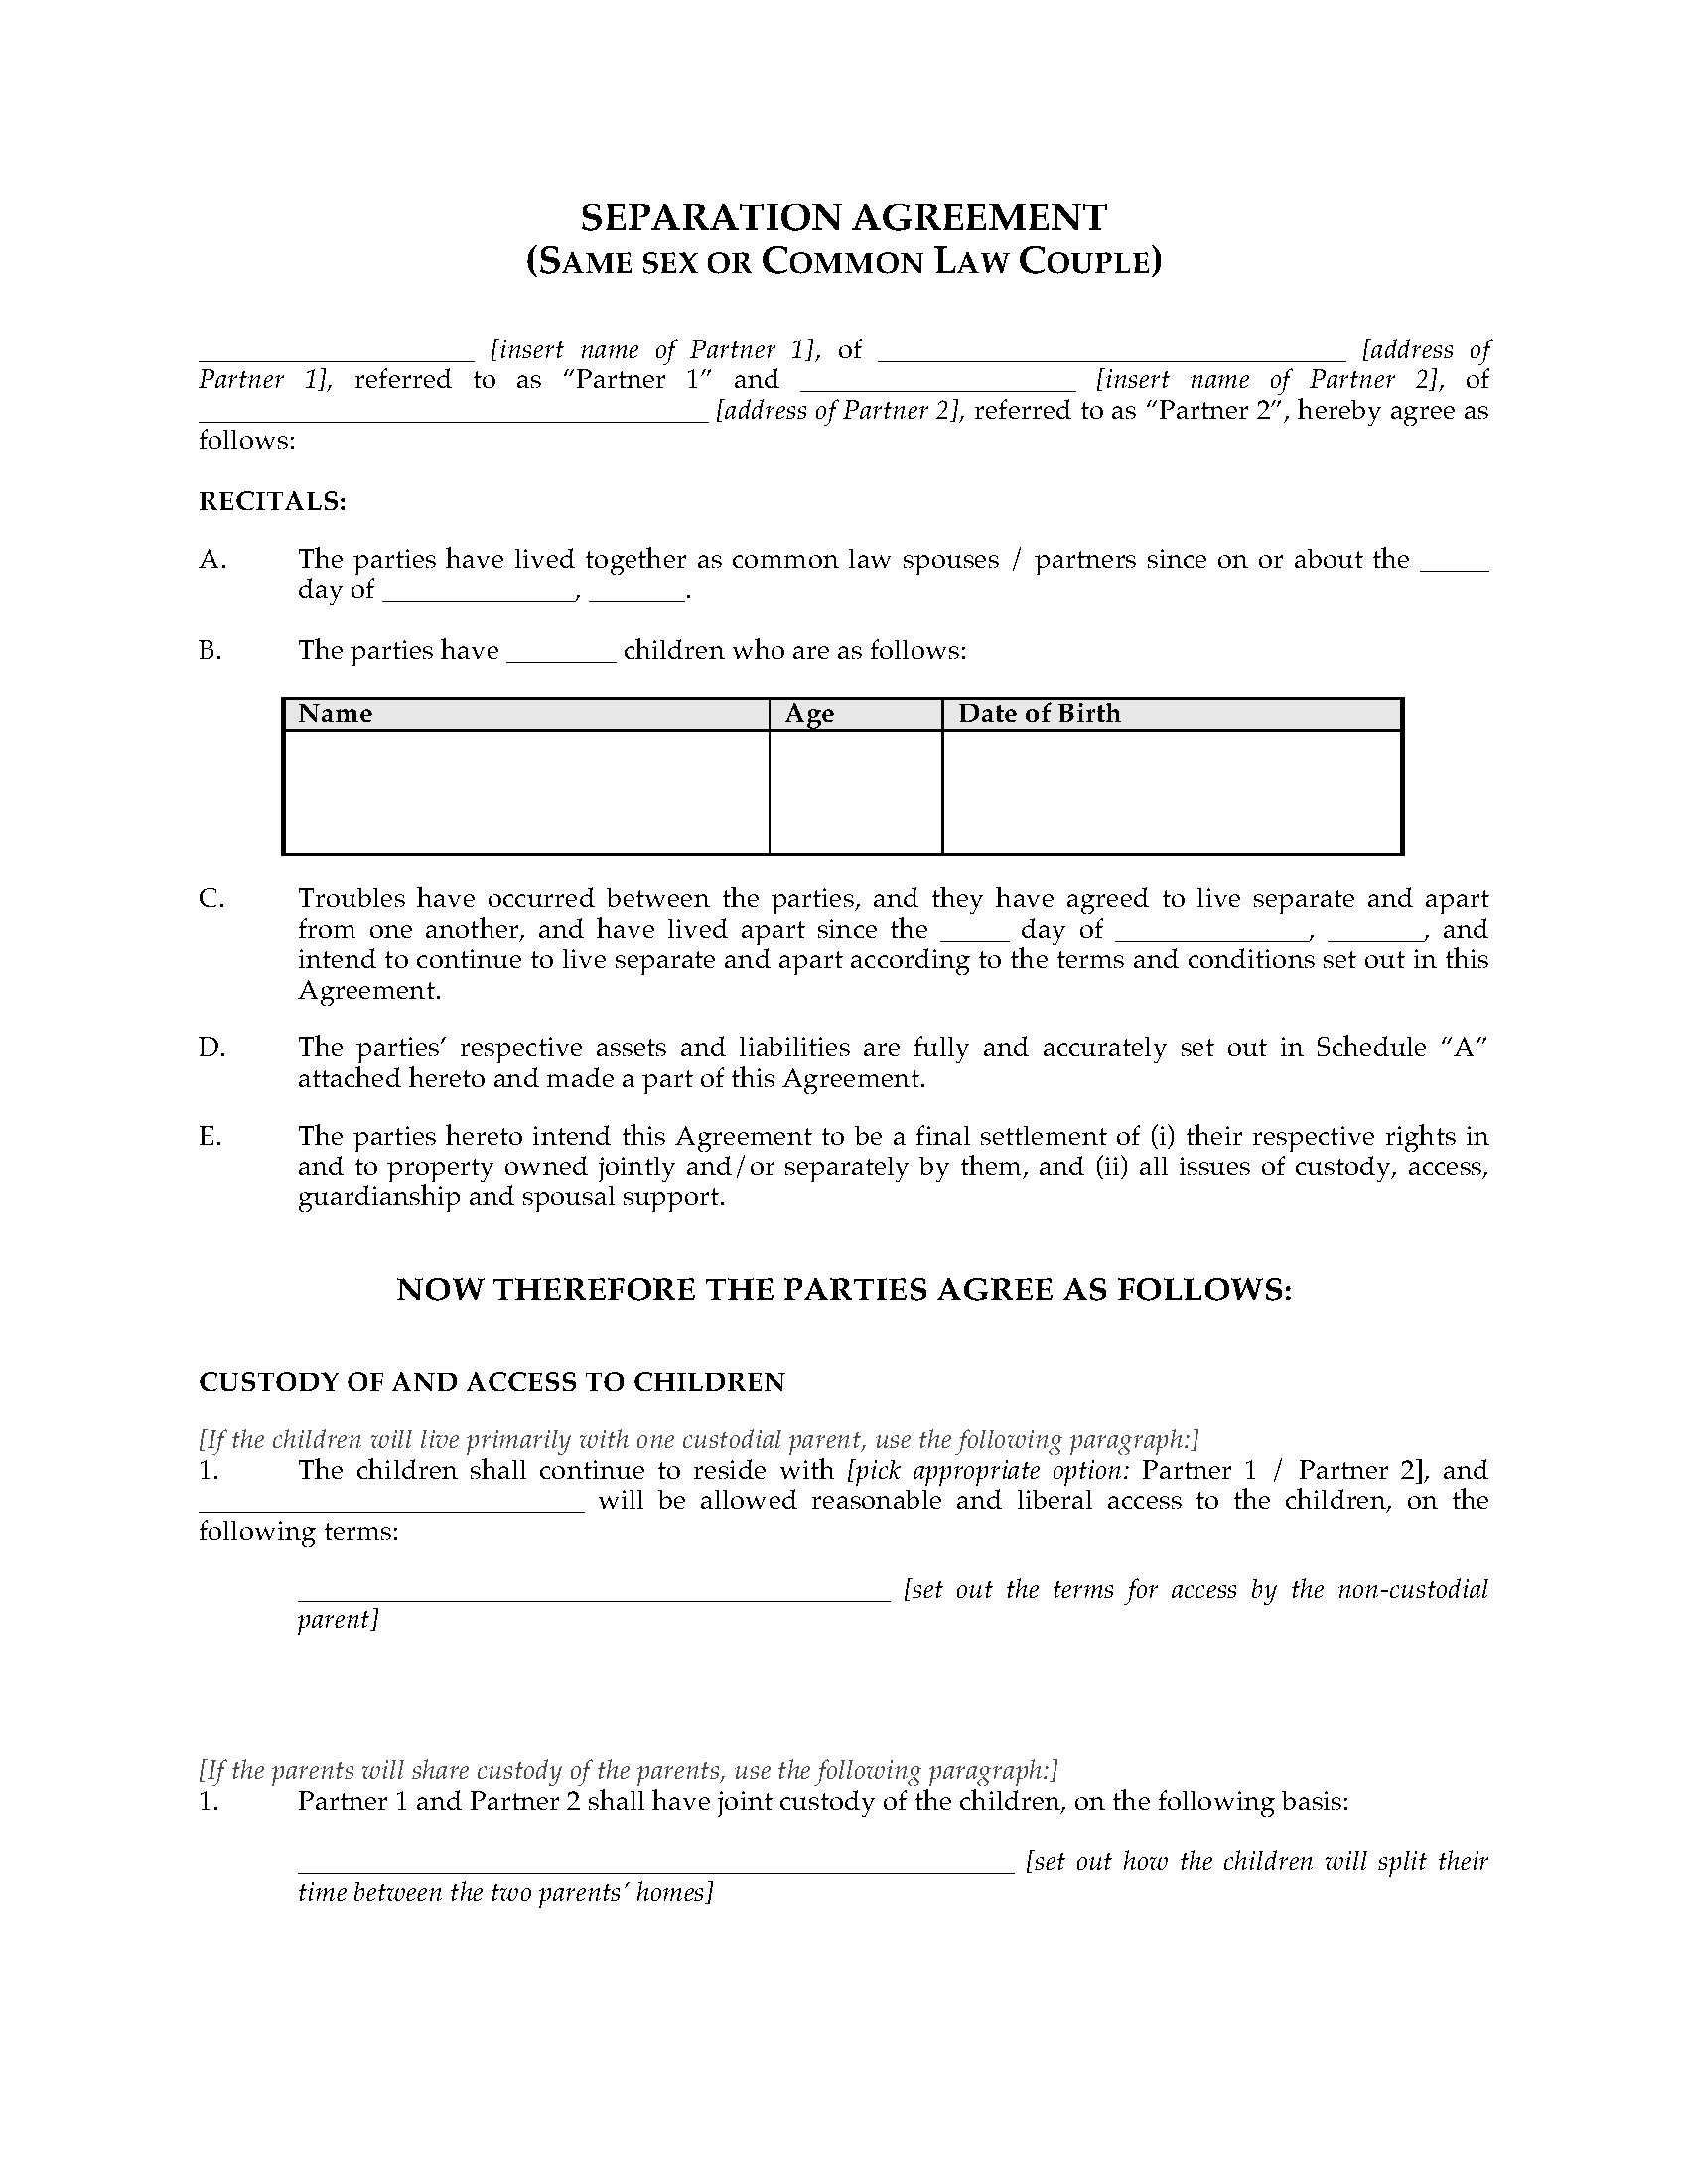 Canada Separation Agreement for Common Law or Same Sex Couple With common law separation agreement template